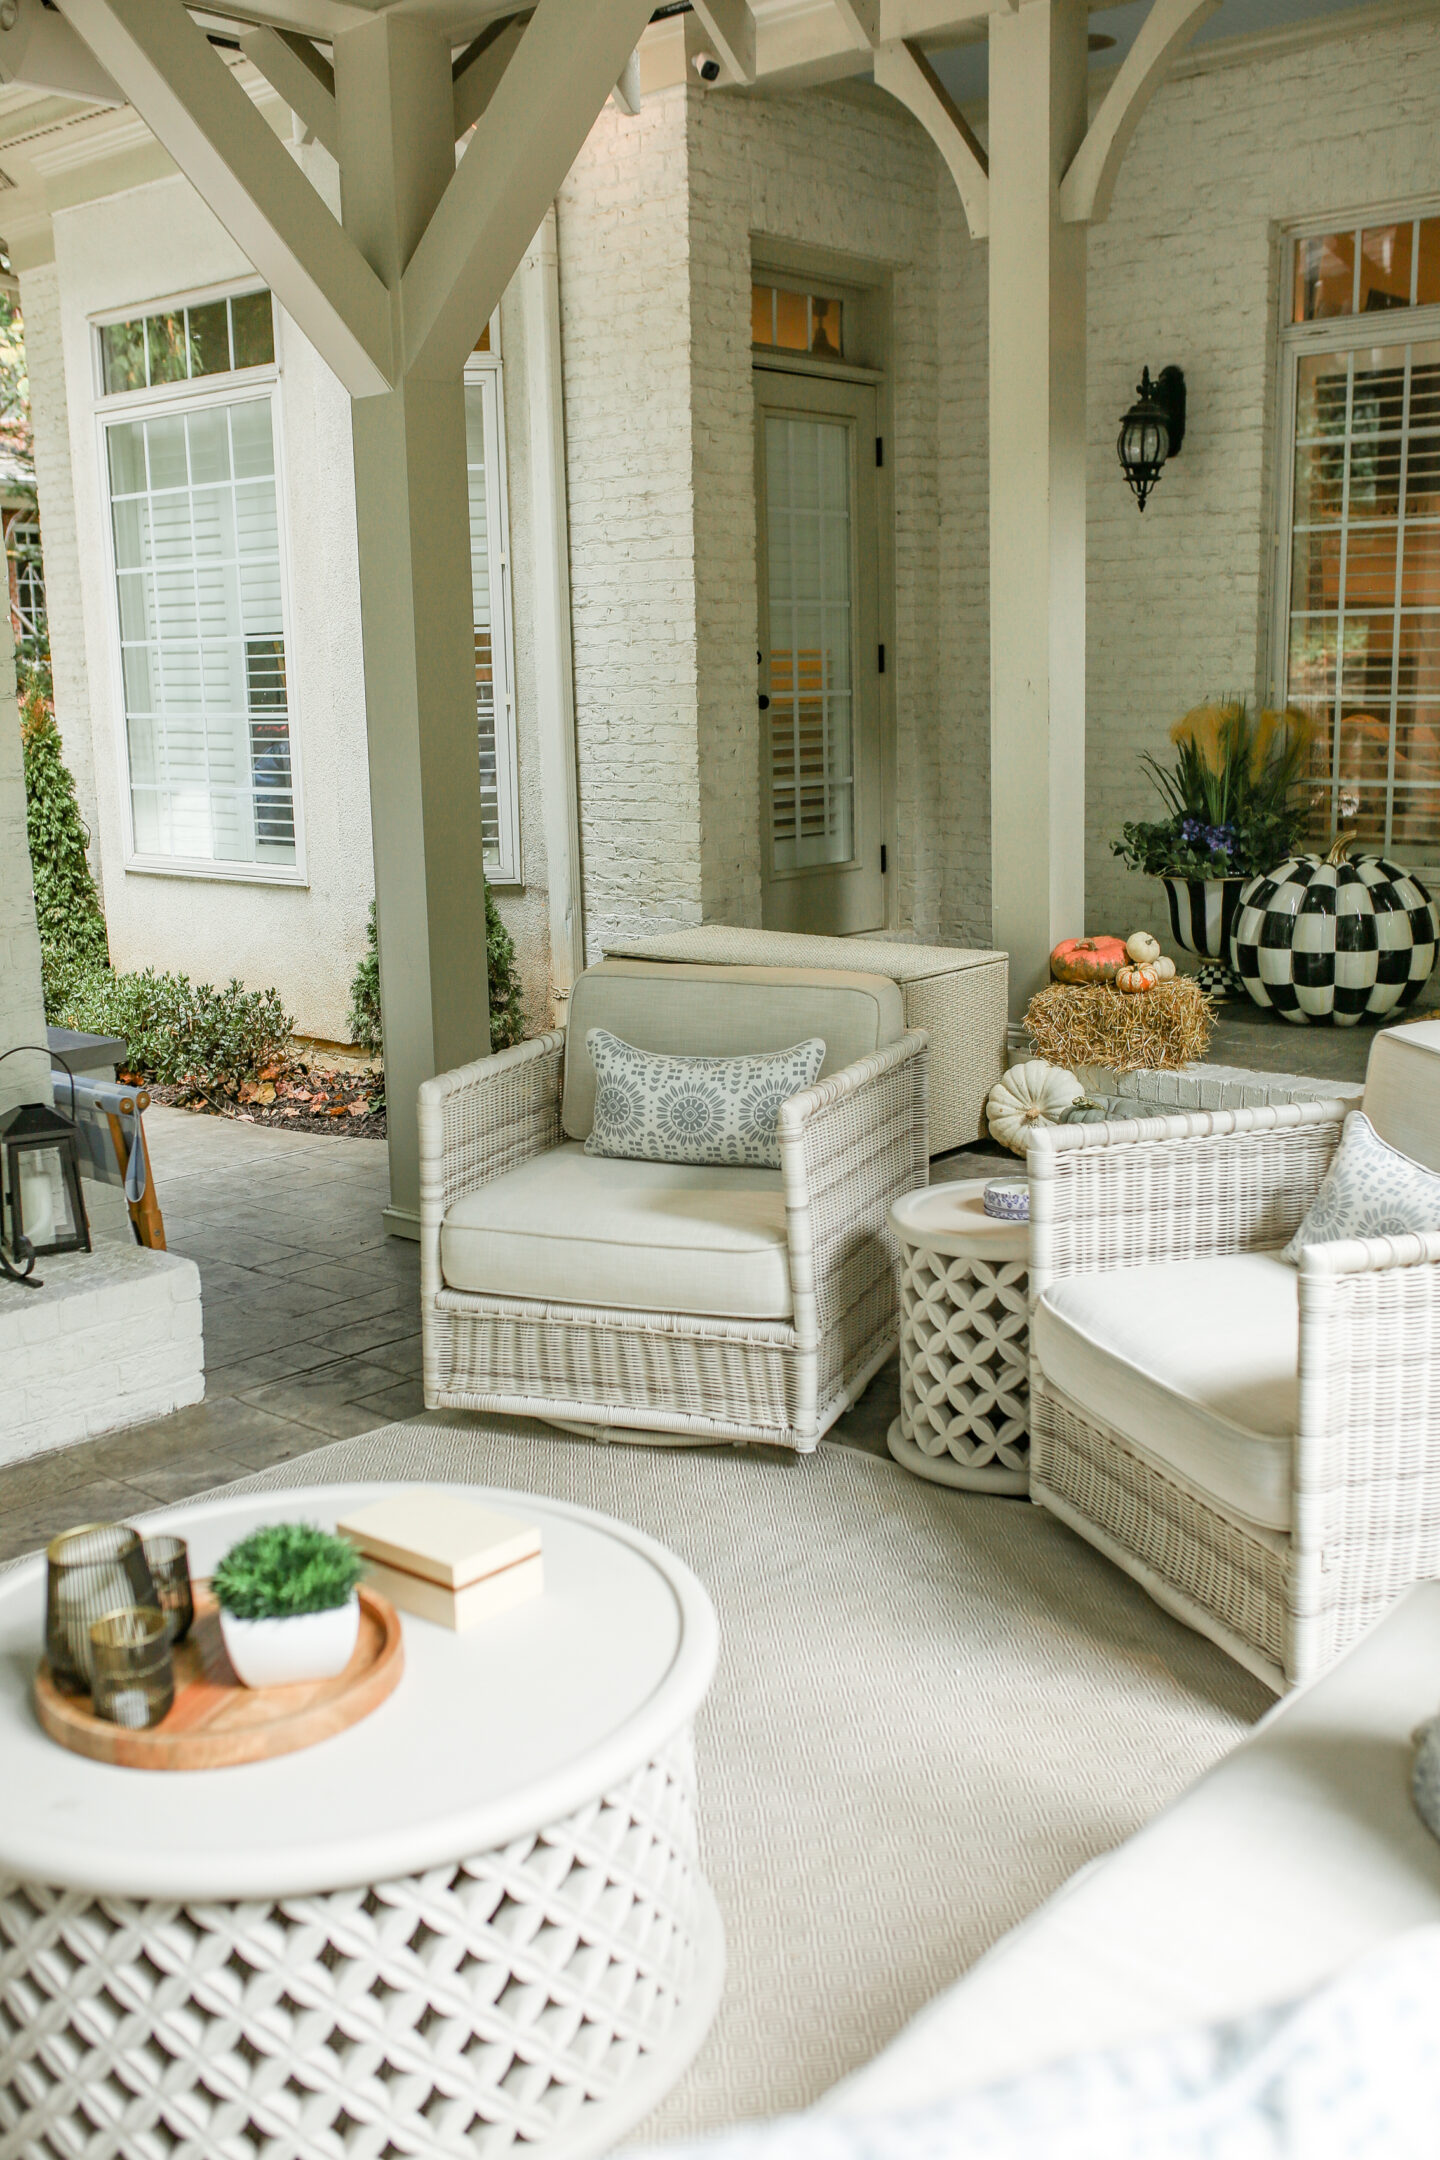 2 outdoor wicker chairs on back patio